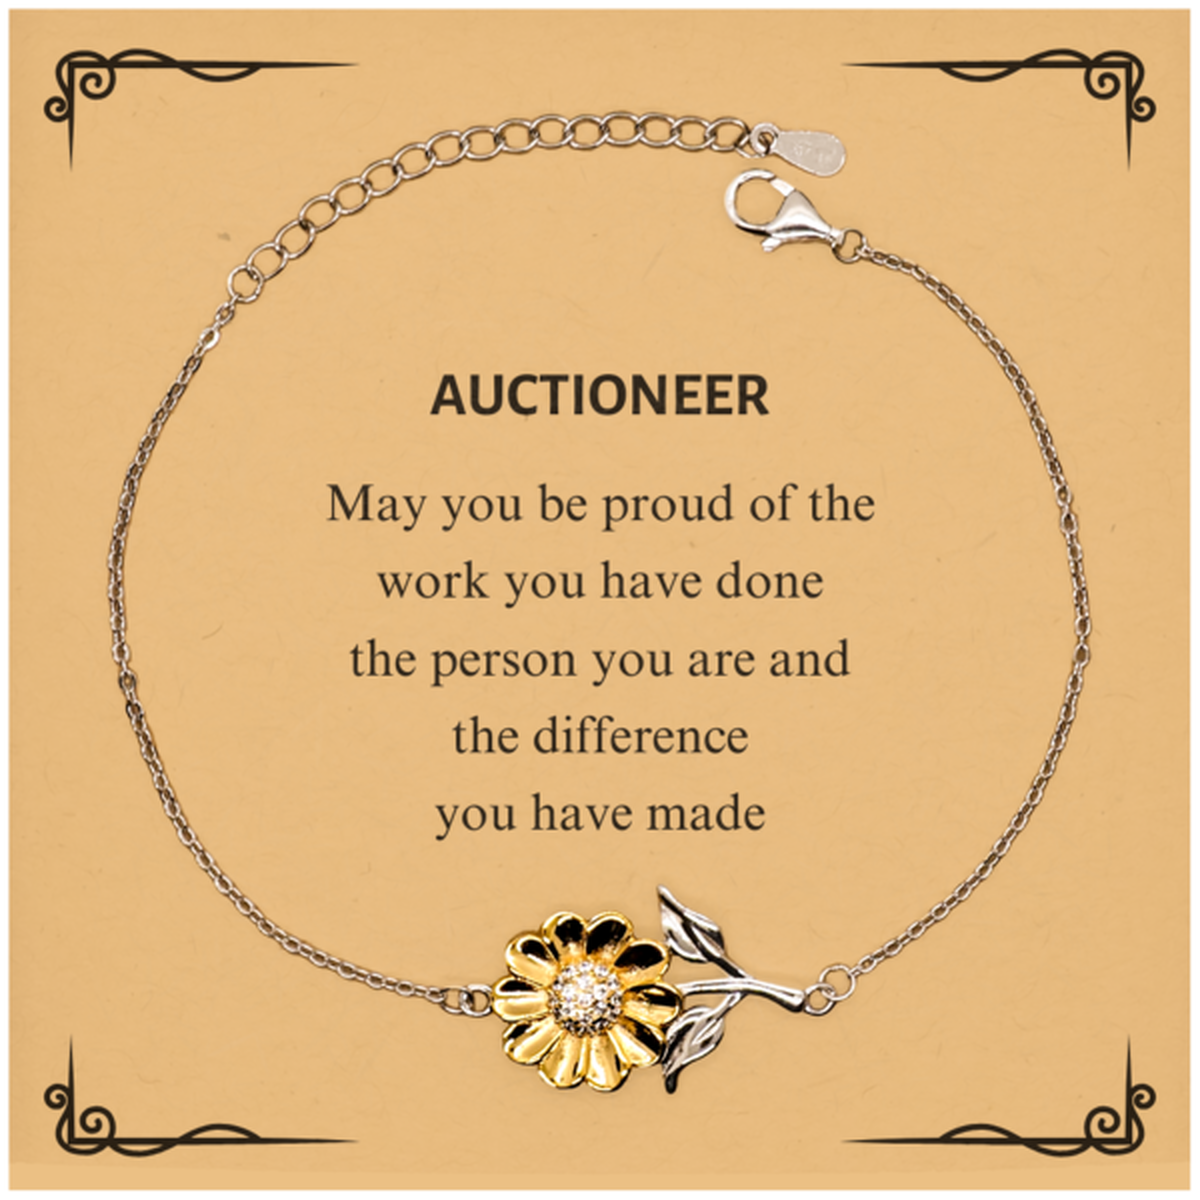 Auctioneer May you be proud of the work you have done, Retirement Auctioneer Sunflower Bracelet for Colleague Appreciation Gifts Amazing for Auctioneer